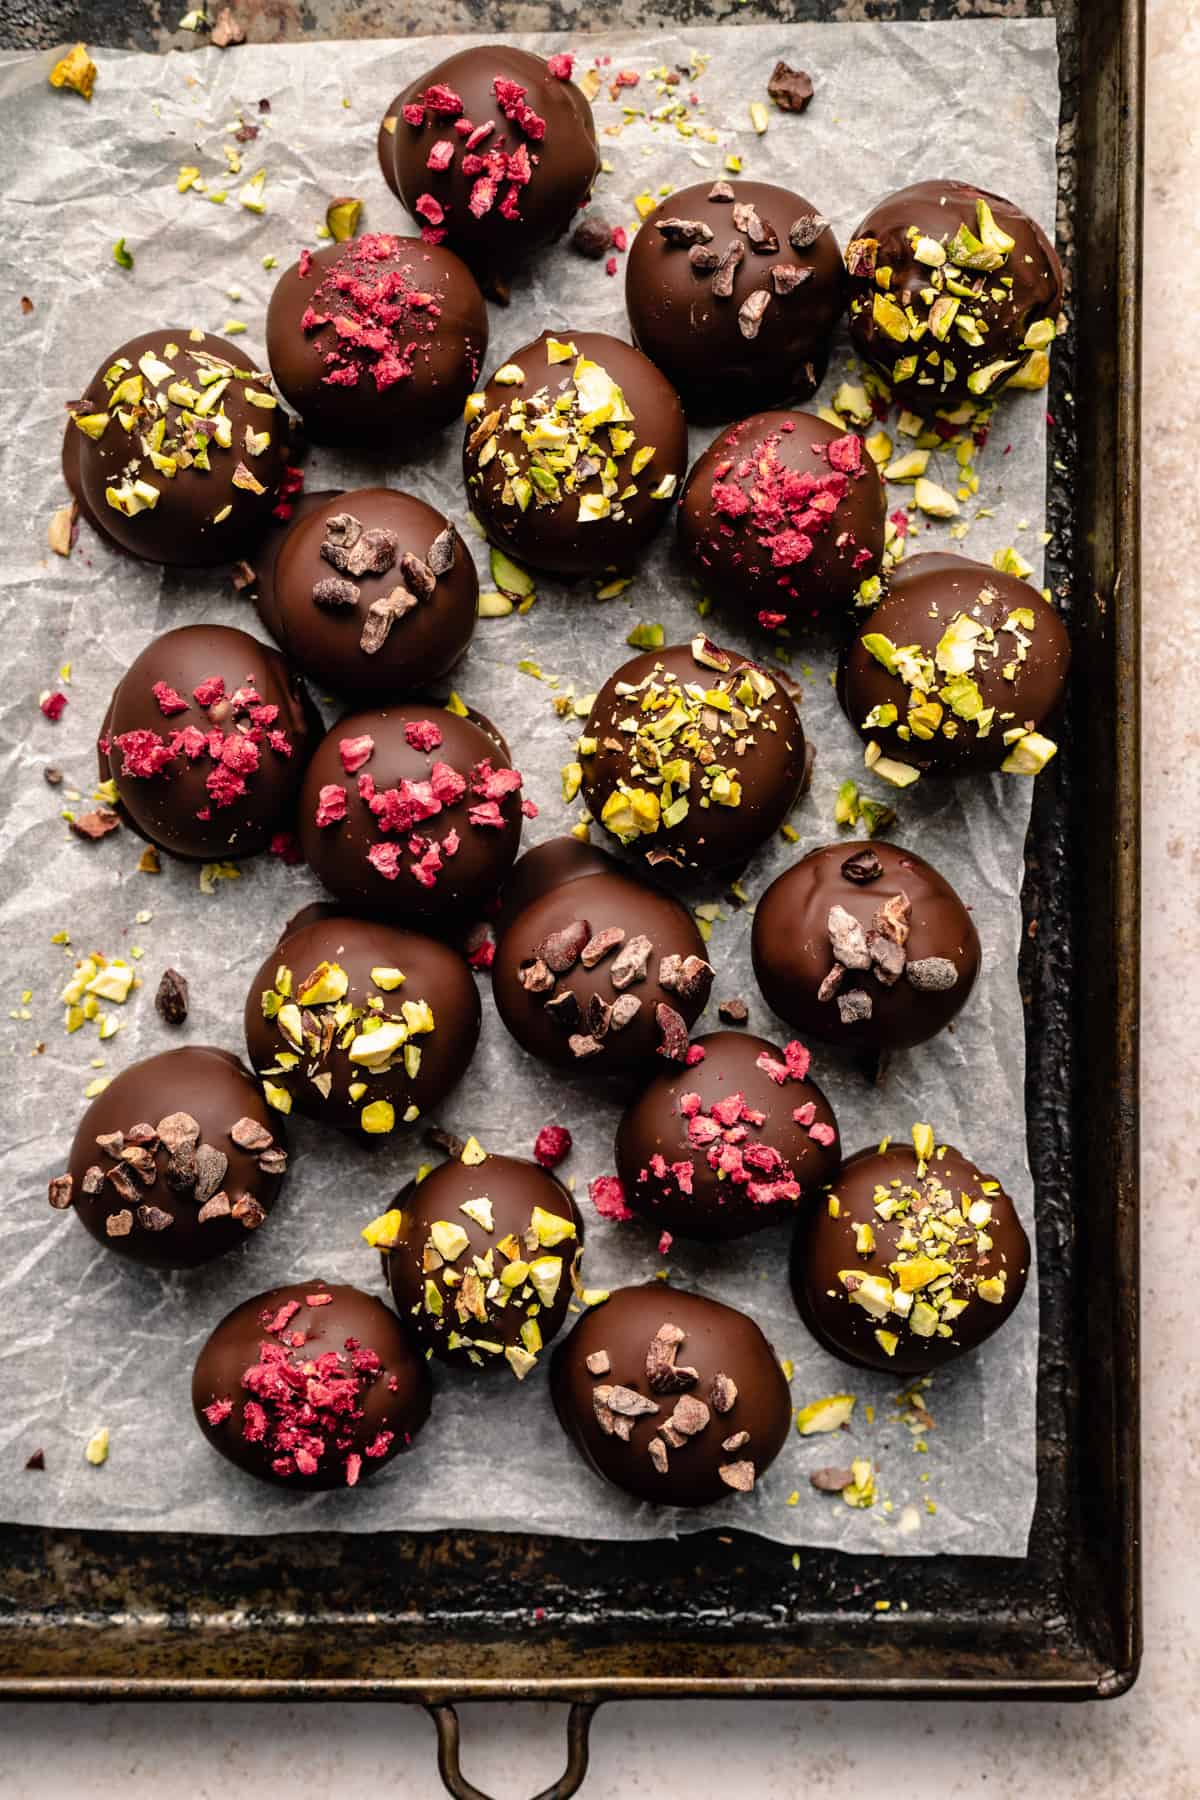 A tray of raspberry dark chocolate truffles with toppings of pistachios, freeze dried raspberries and cacao nibs.